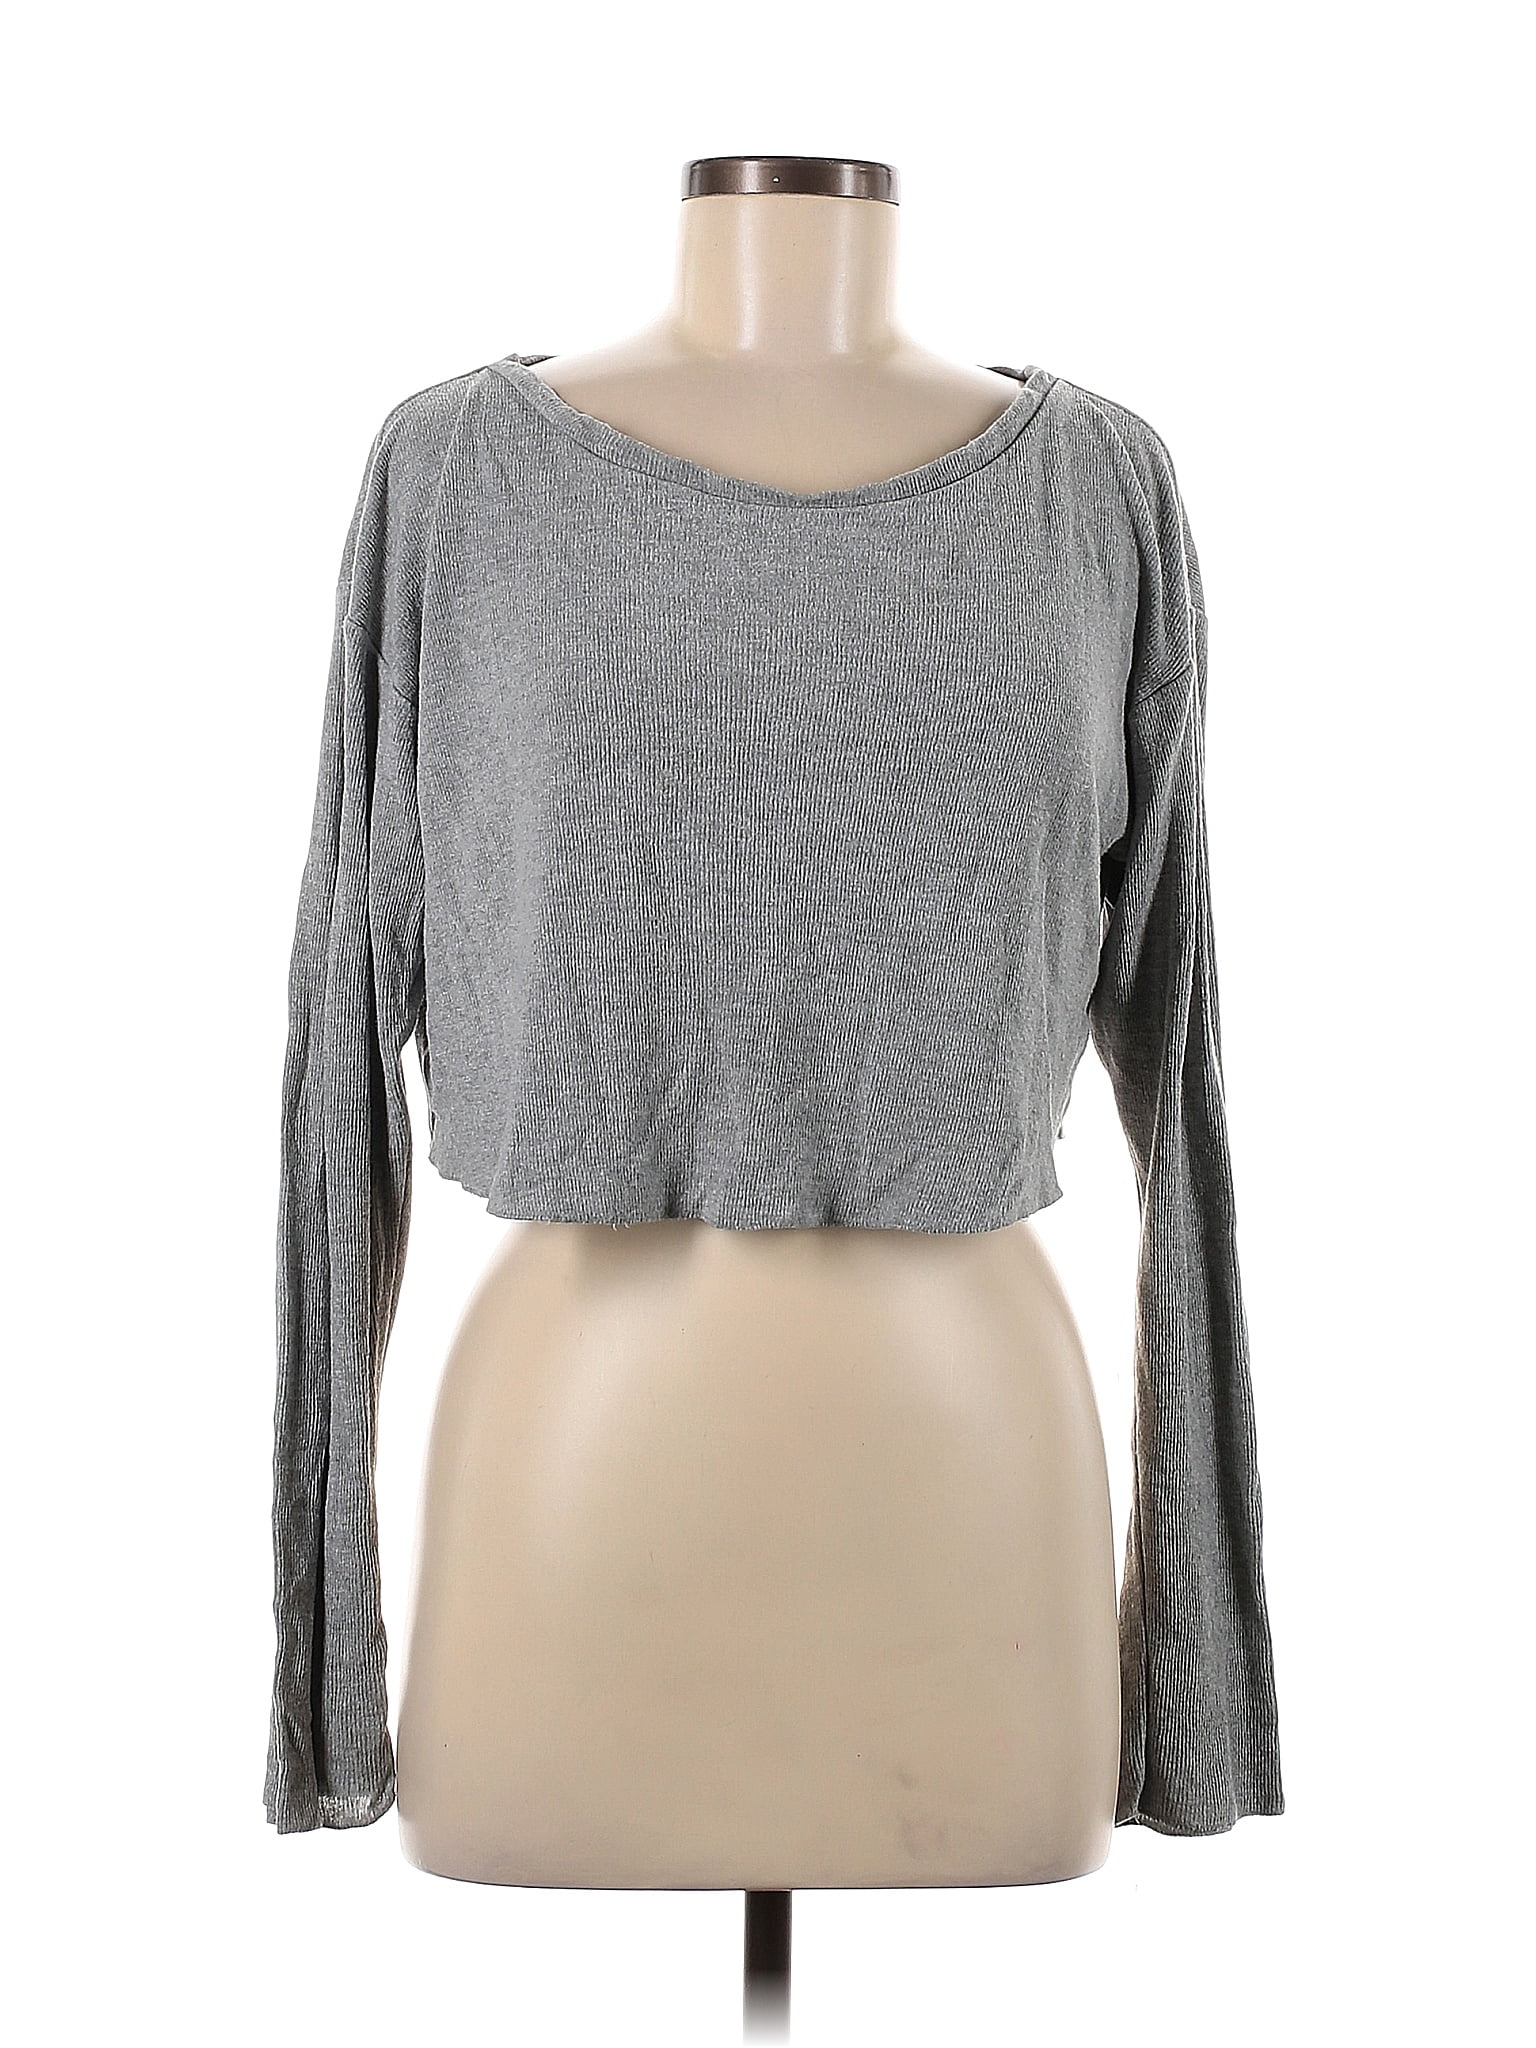 Brandy Melville Gray Tank Top One Size - 31% off